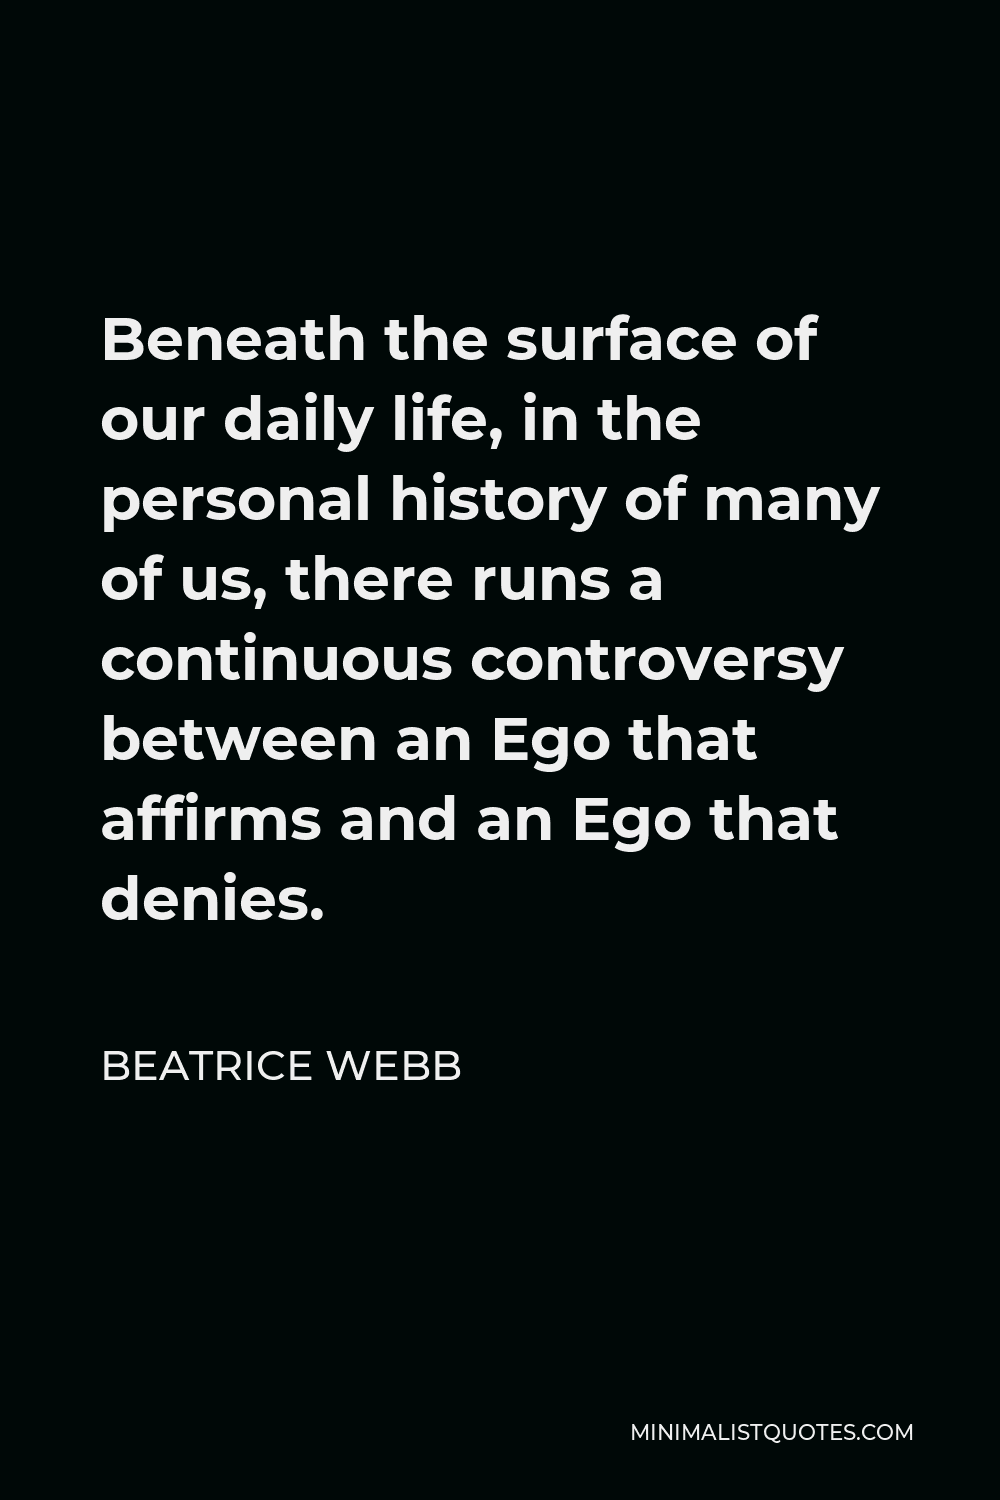 Beatrice Webb Quote - Beneath the surface of our daily life, in the personal history of many of us, there runs a continuous controversy between an Ego that affirms and an Ego that denies.